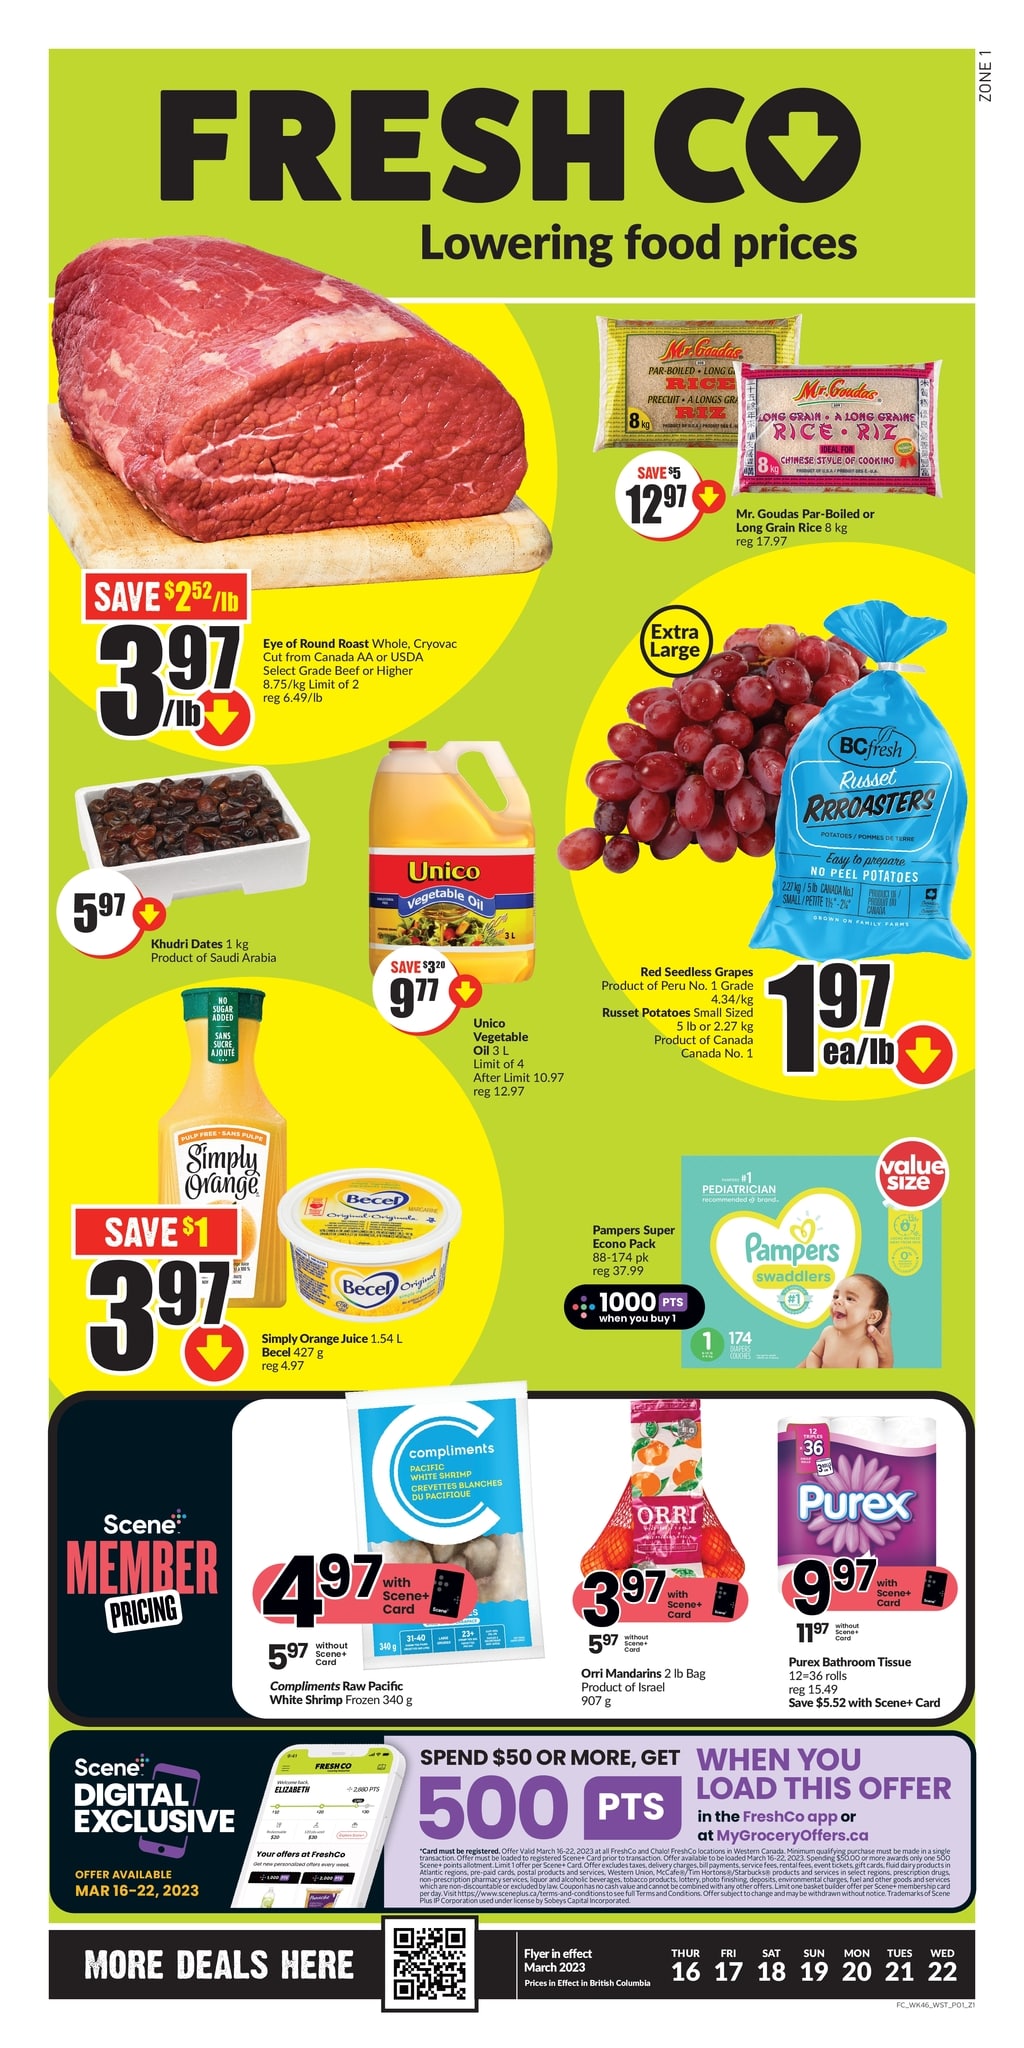 FreshCo - British Columbia - Weekly Flyer Specials - Page 1